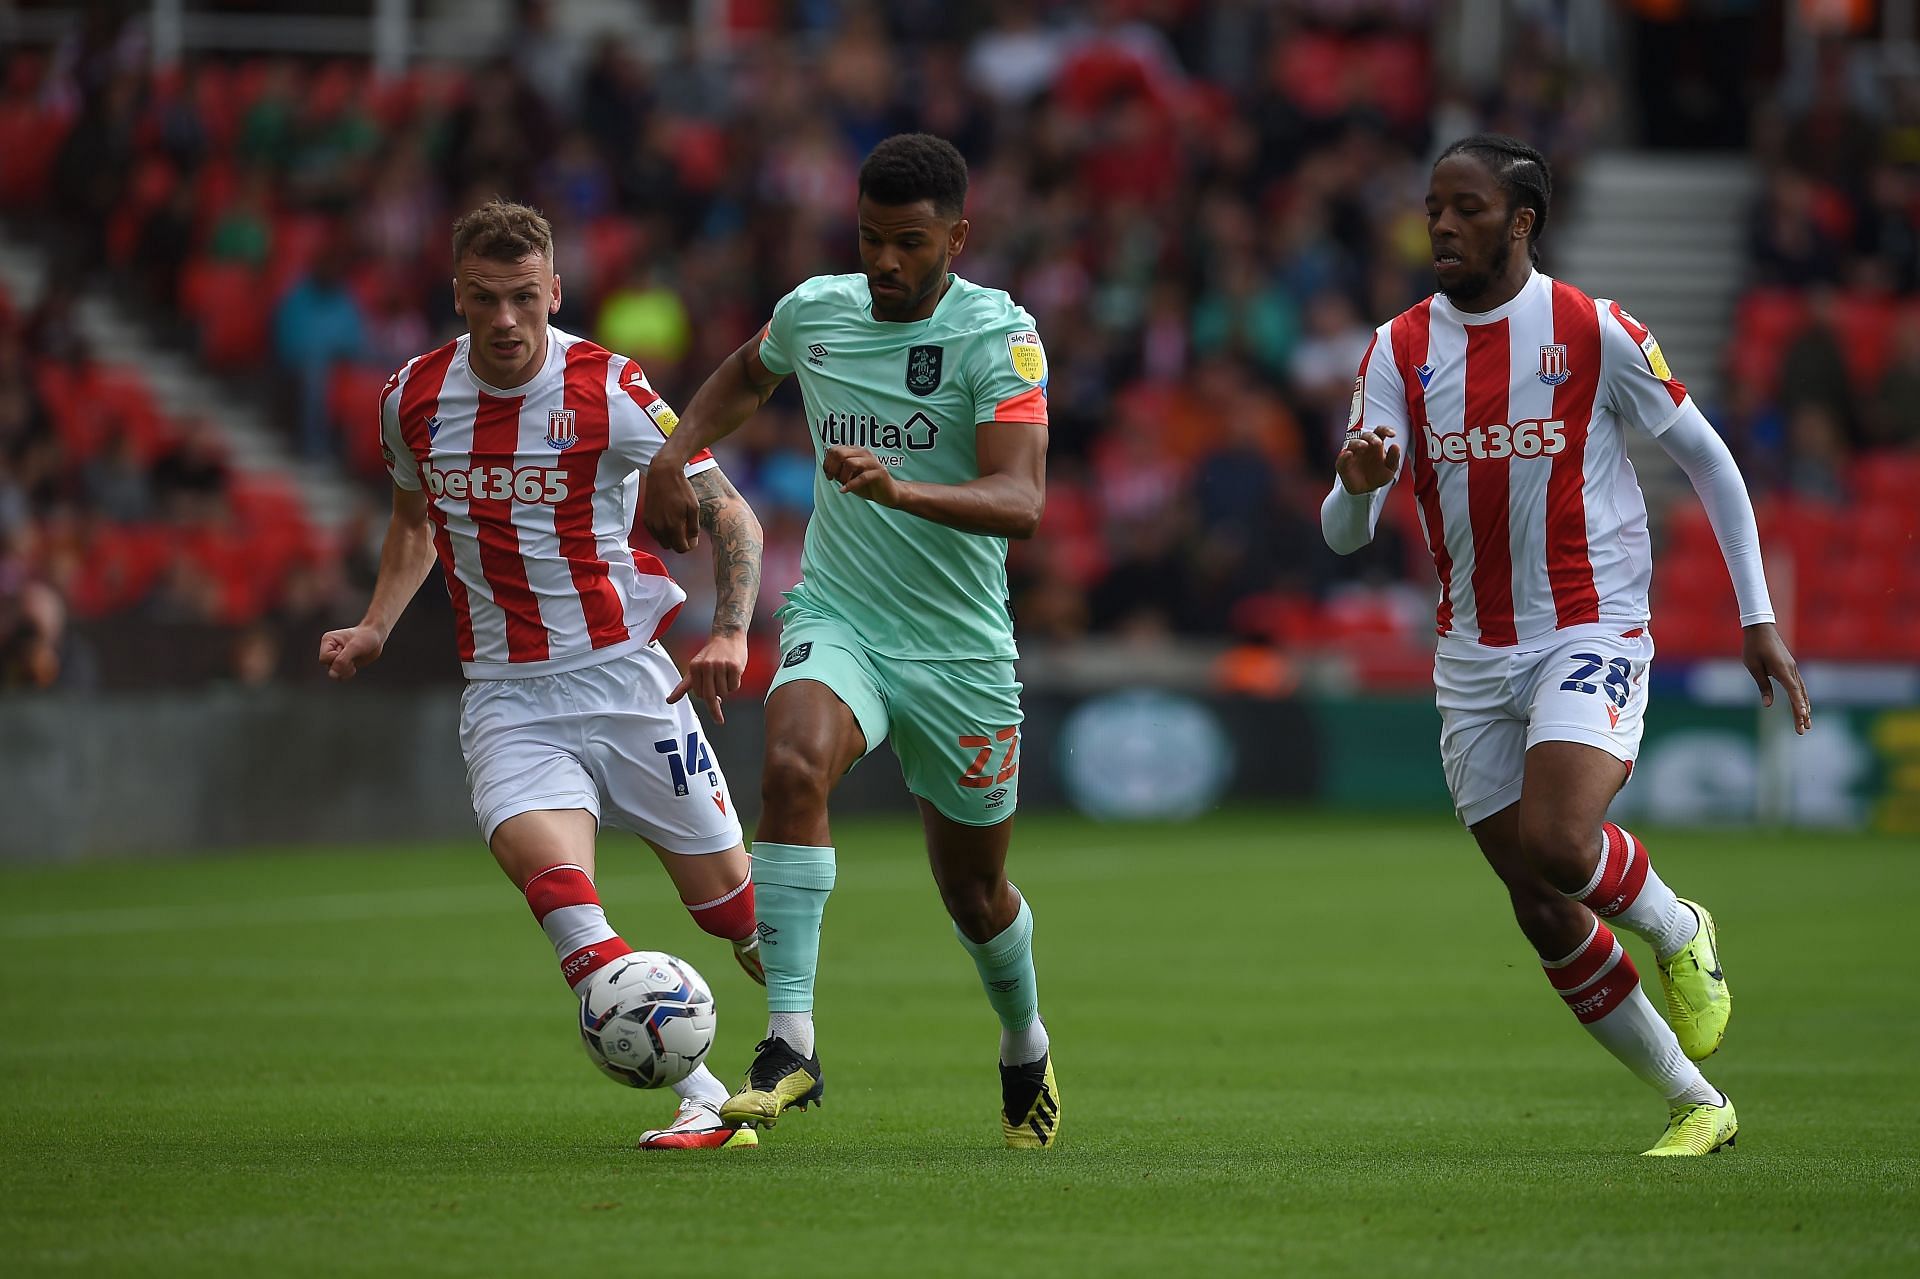 Stoke City face Huddersfield Town on Friday